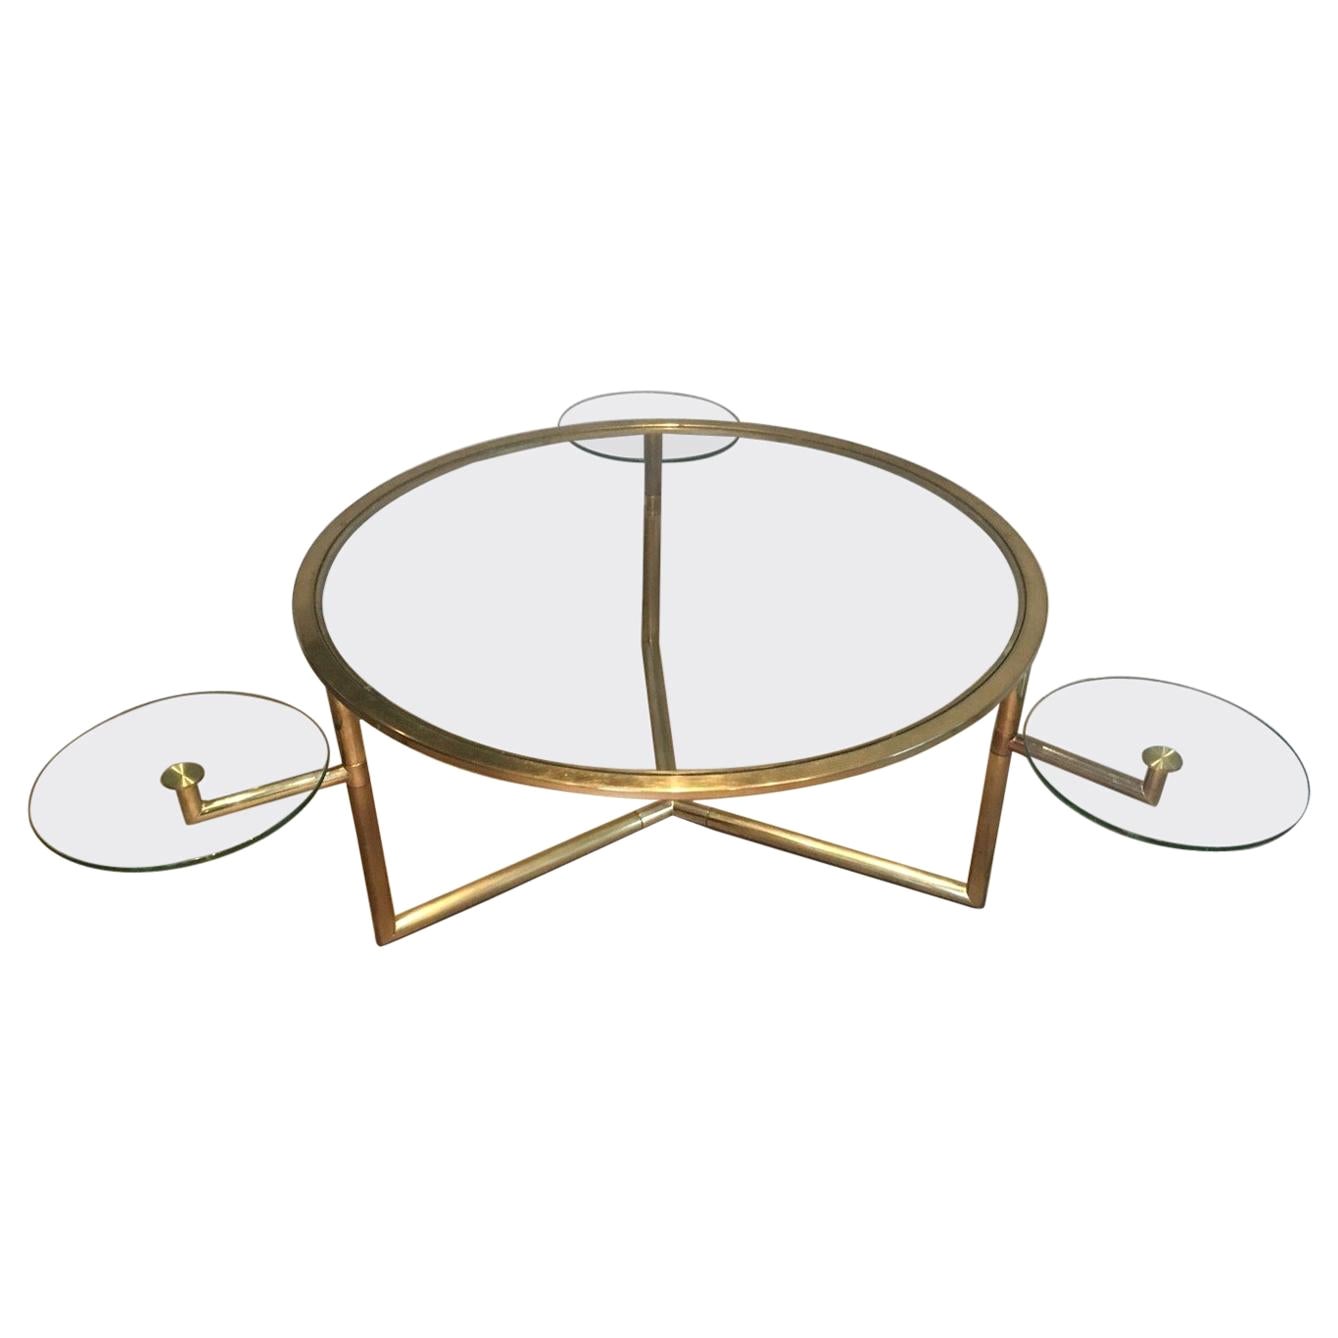 Rare Round Gold Gilt Coffee Table with Removable Round Glass Shelves